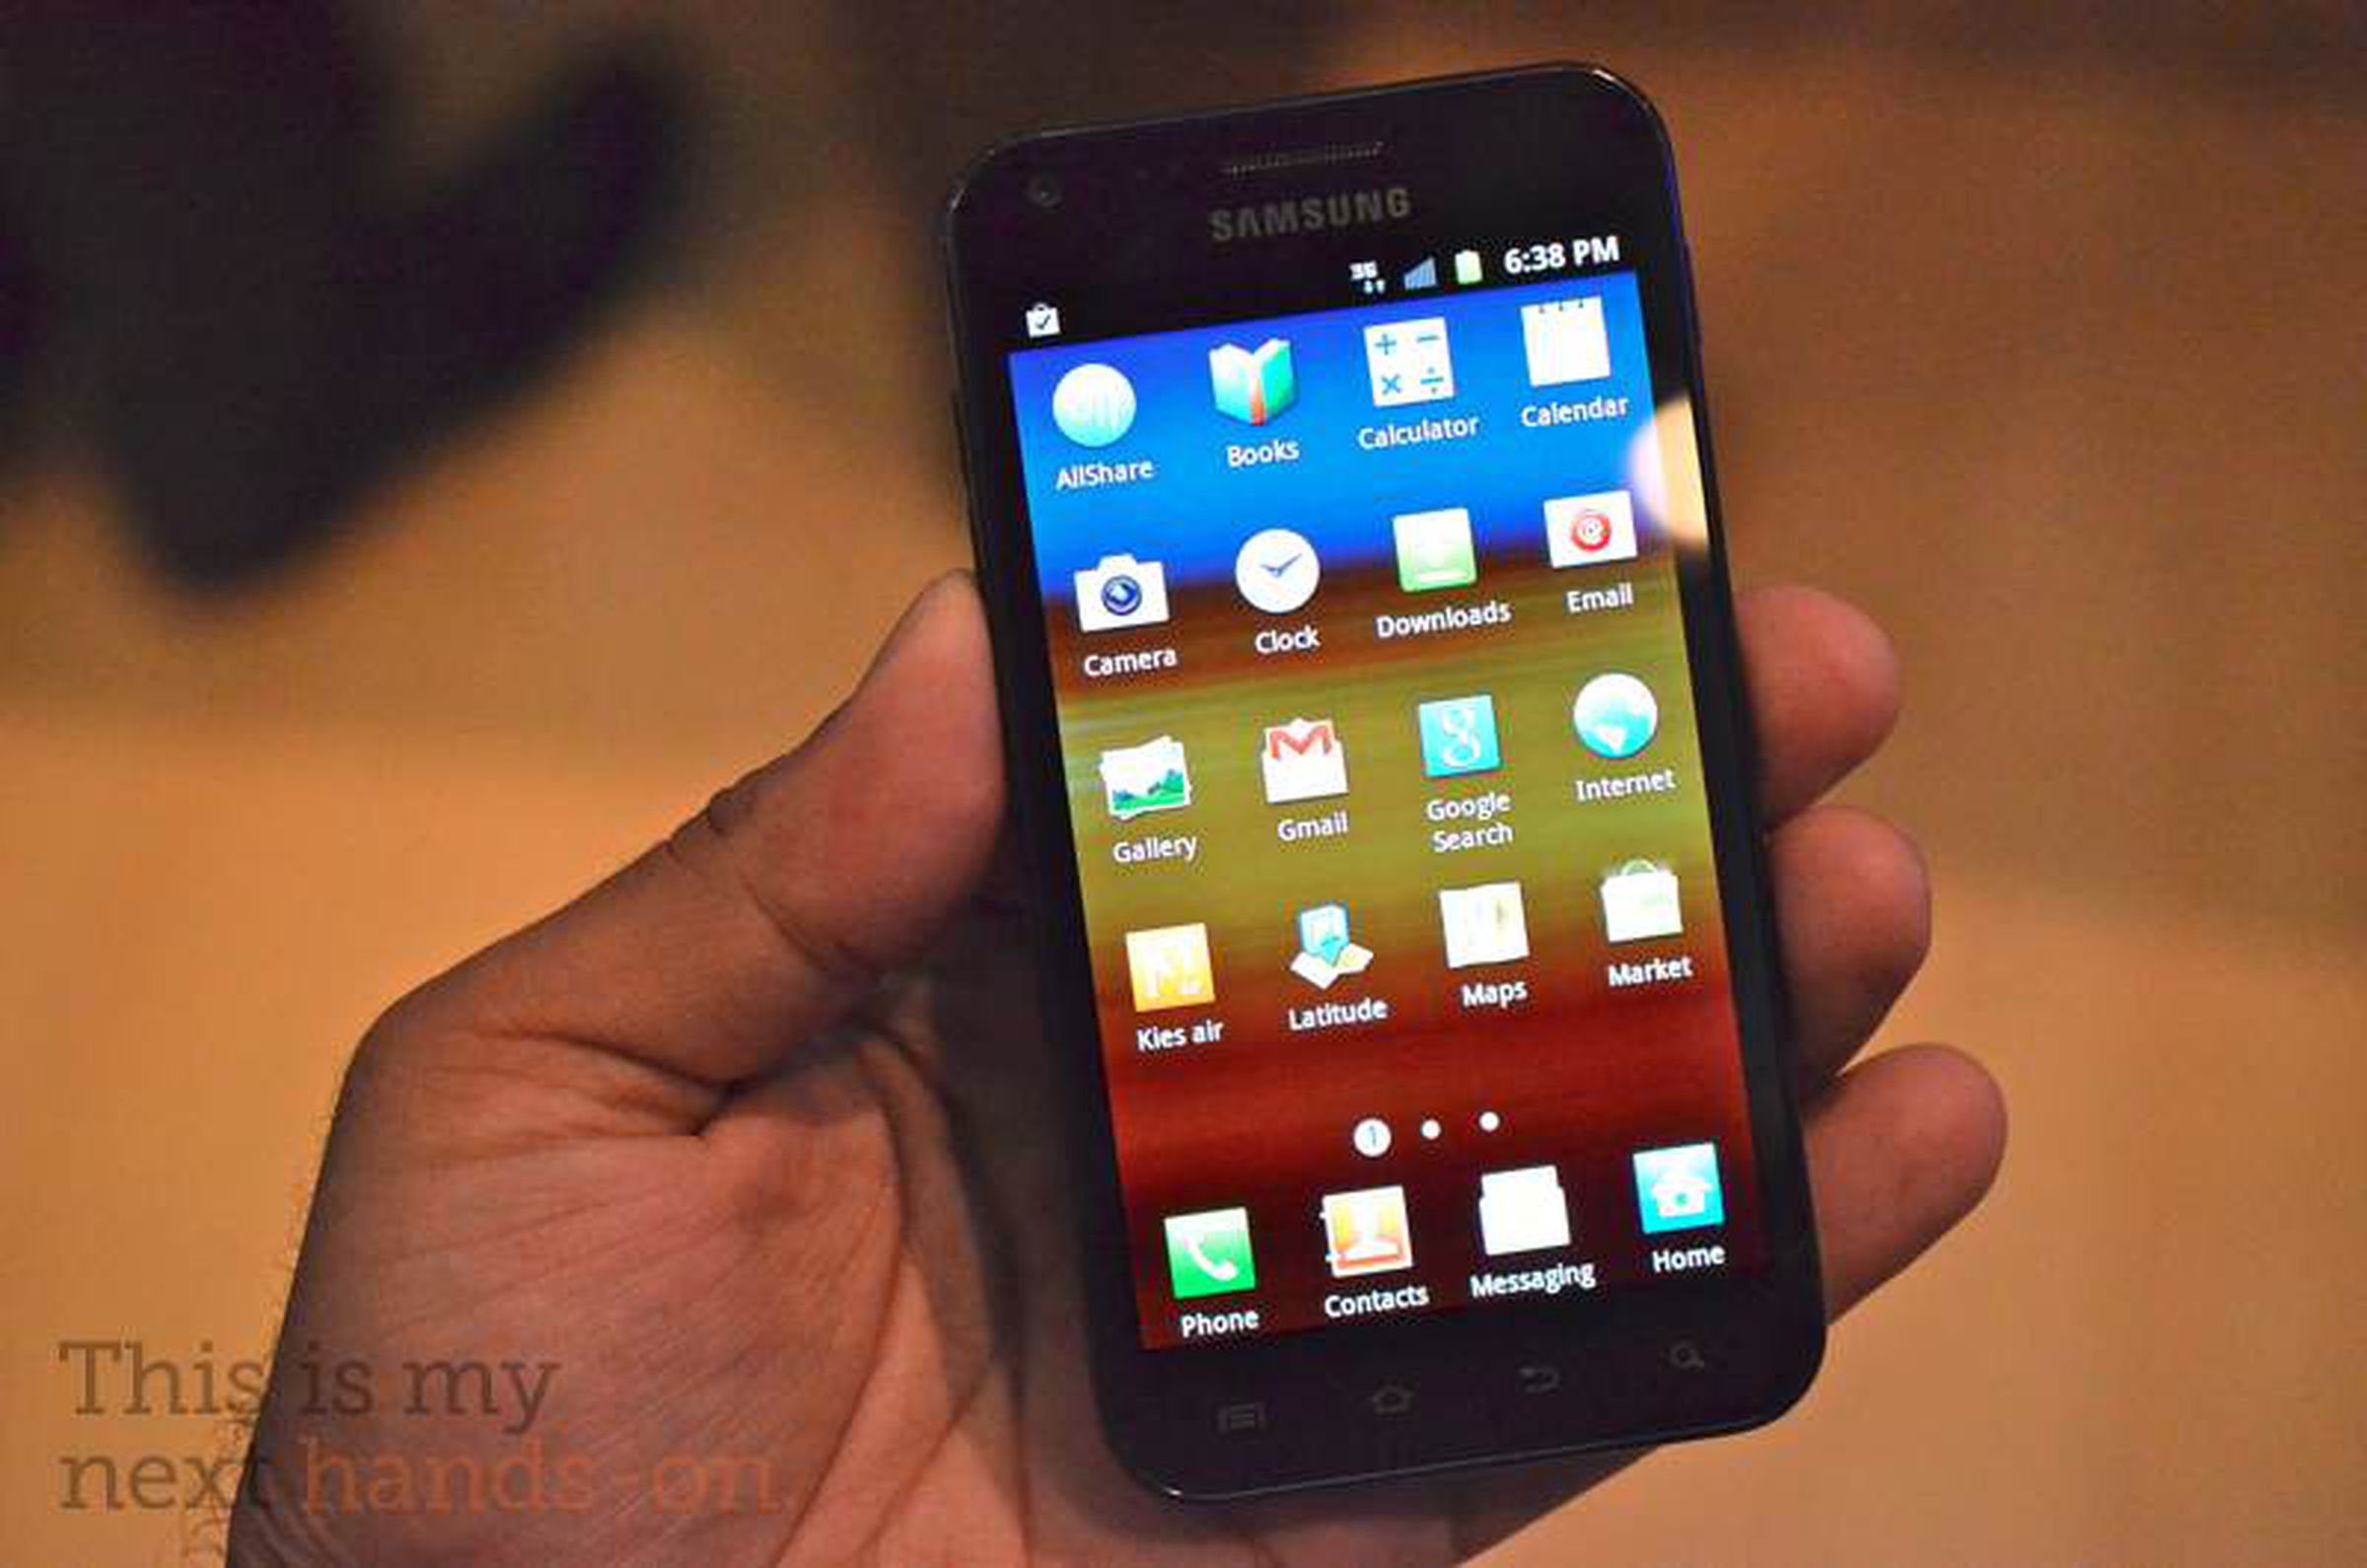 Sprint Galaxy S II Epic 4G Touch available September 16th for $199.99 on 2-year contract — Hands-on pictures!